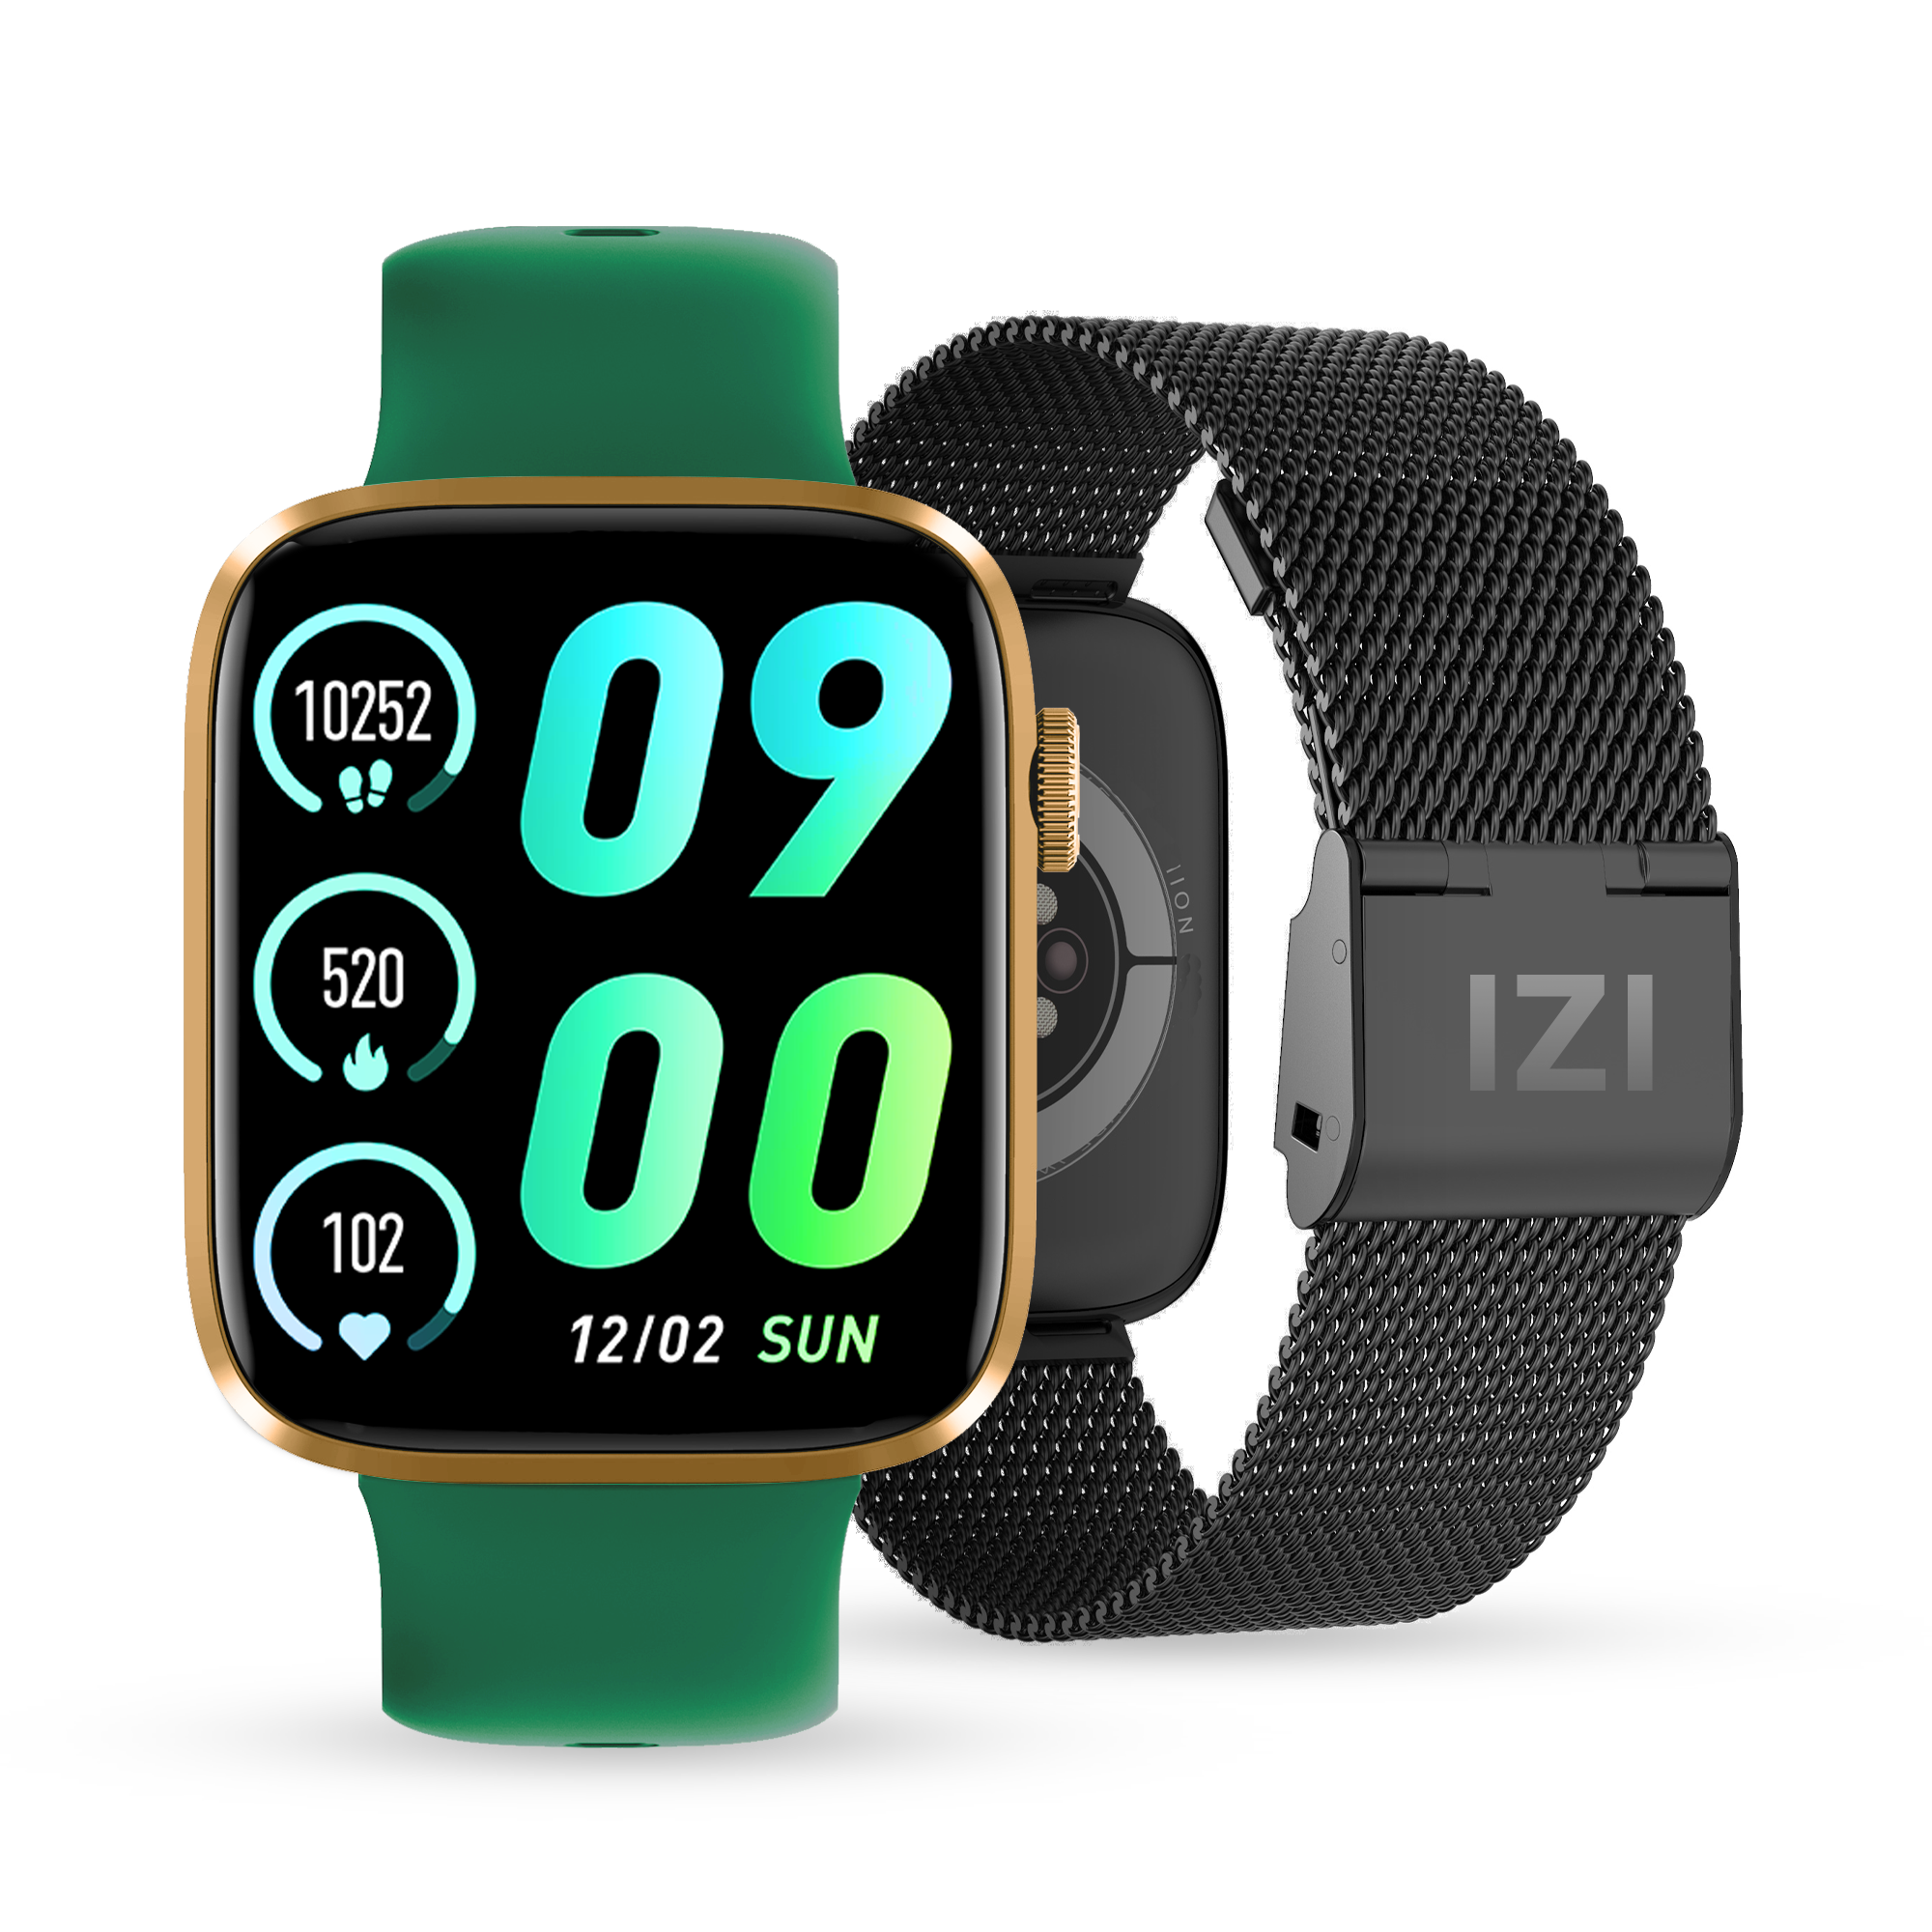 1.92" Retina Display IZI Smart Pro Smartwatch, Bluetooth Calling, AI Voice Assistant, 550 NITS, Sports mode, Health Monitor,  Activity Tracker, 500+ Watch Faces, Long Life Battery, 2 Premium Straps